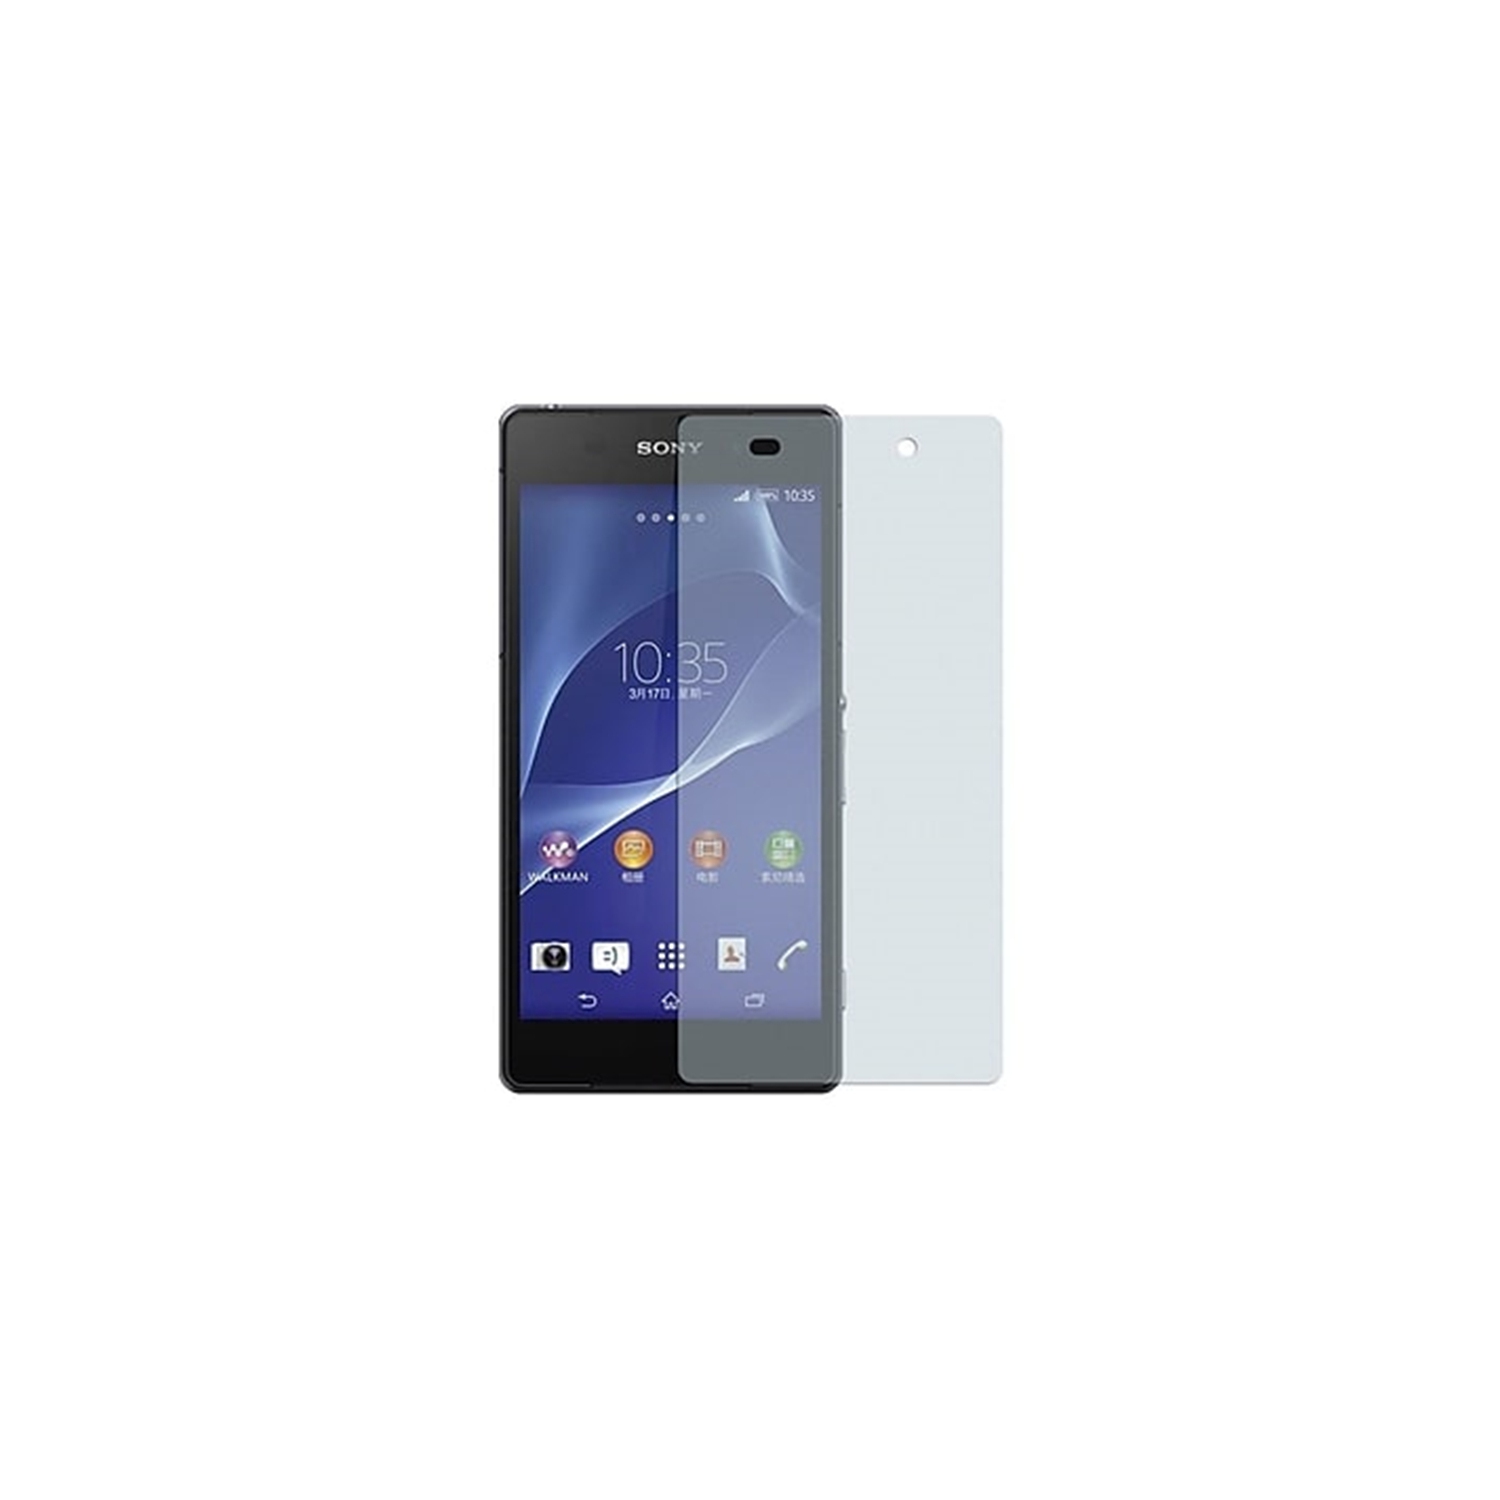 【2 Packs】 CSmart Premium Tempered Glass Screen Protector for Sony Z2, Case Friendly & Bubble Free